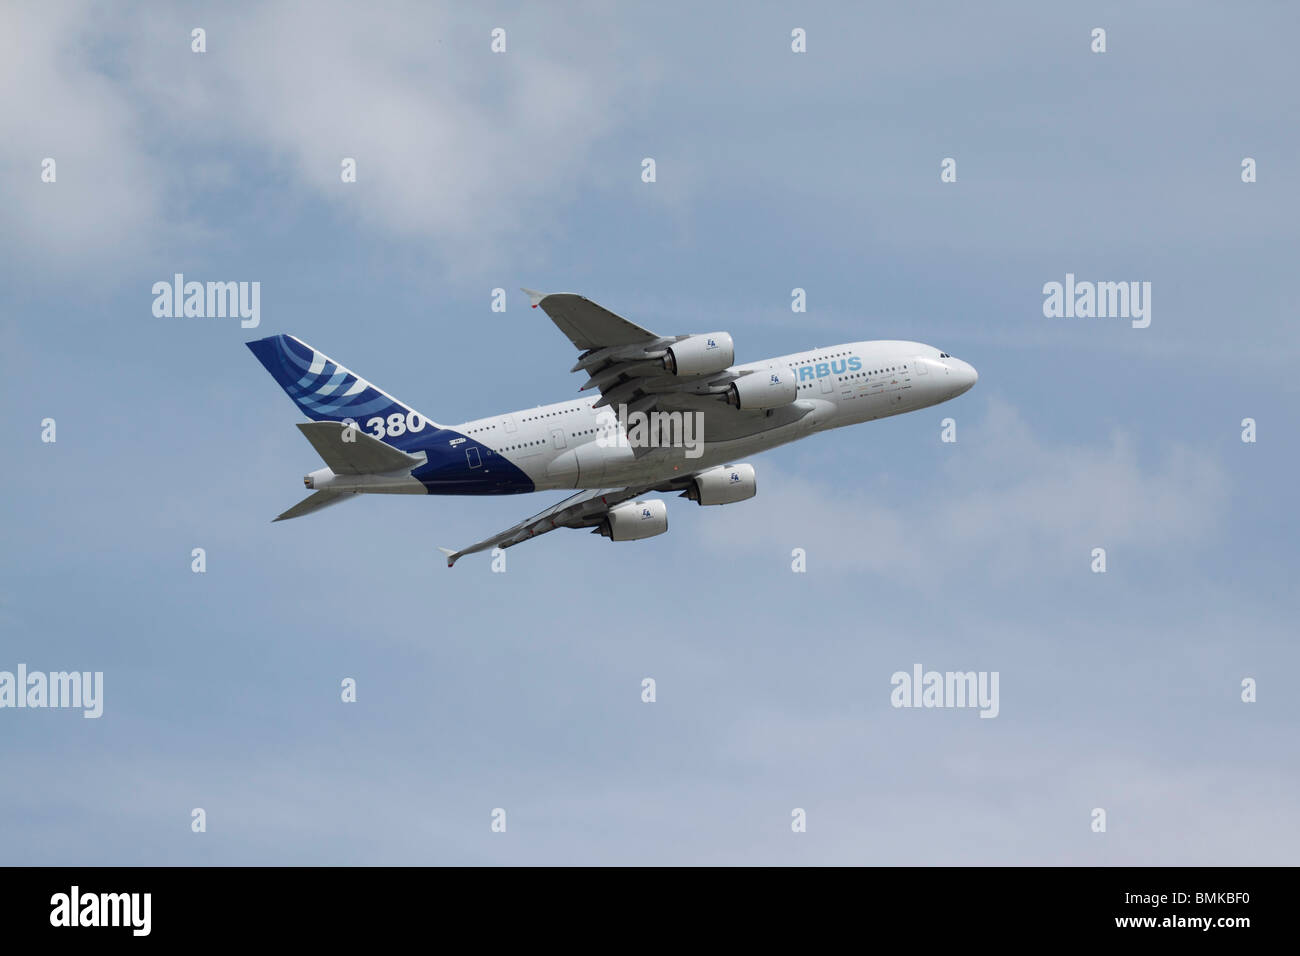 Airbus 380 test aircraft Stock Photo